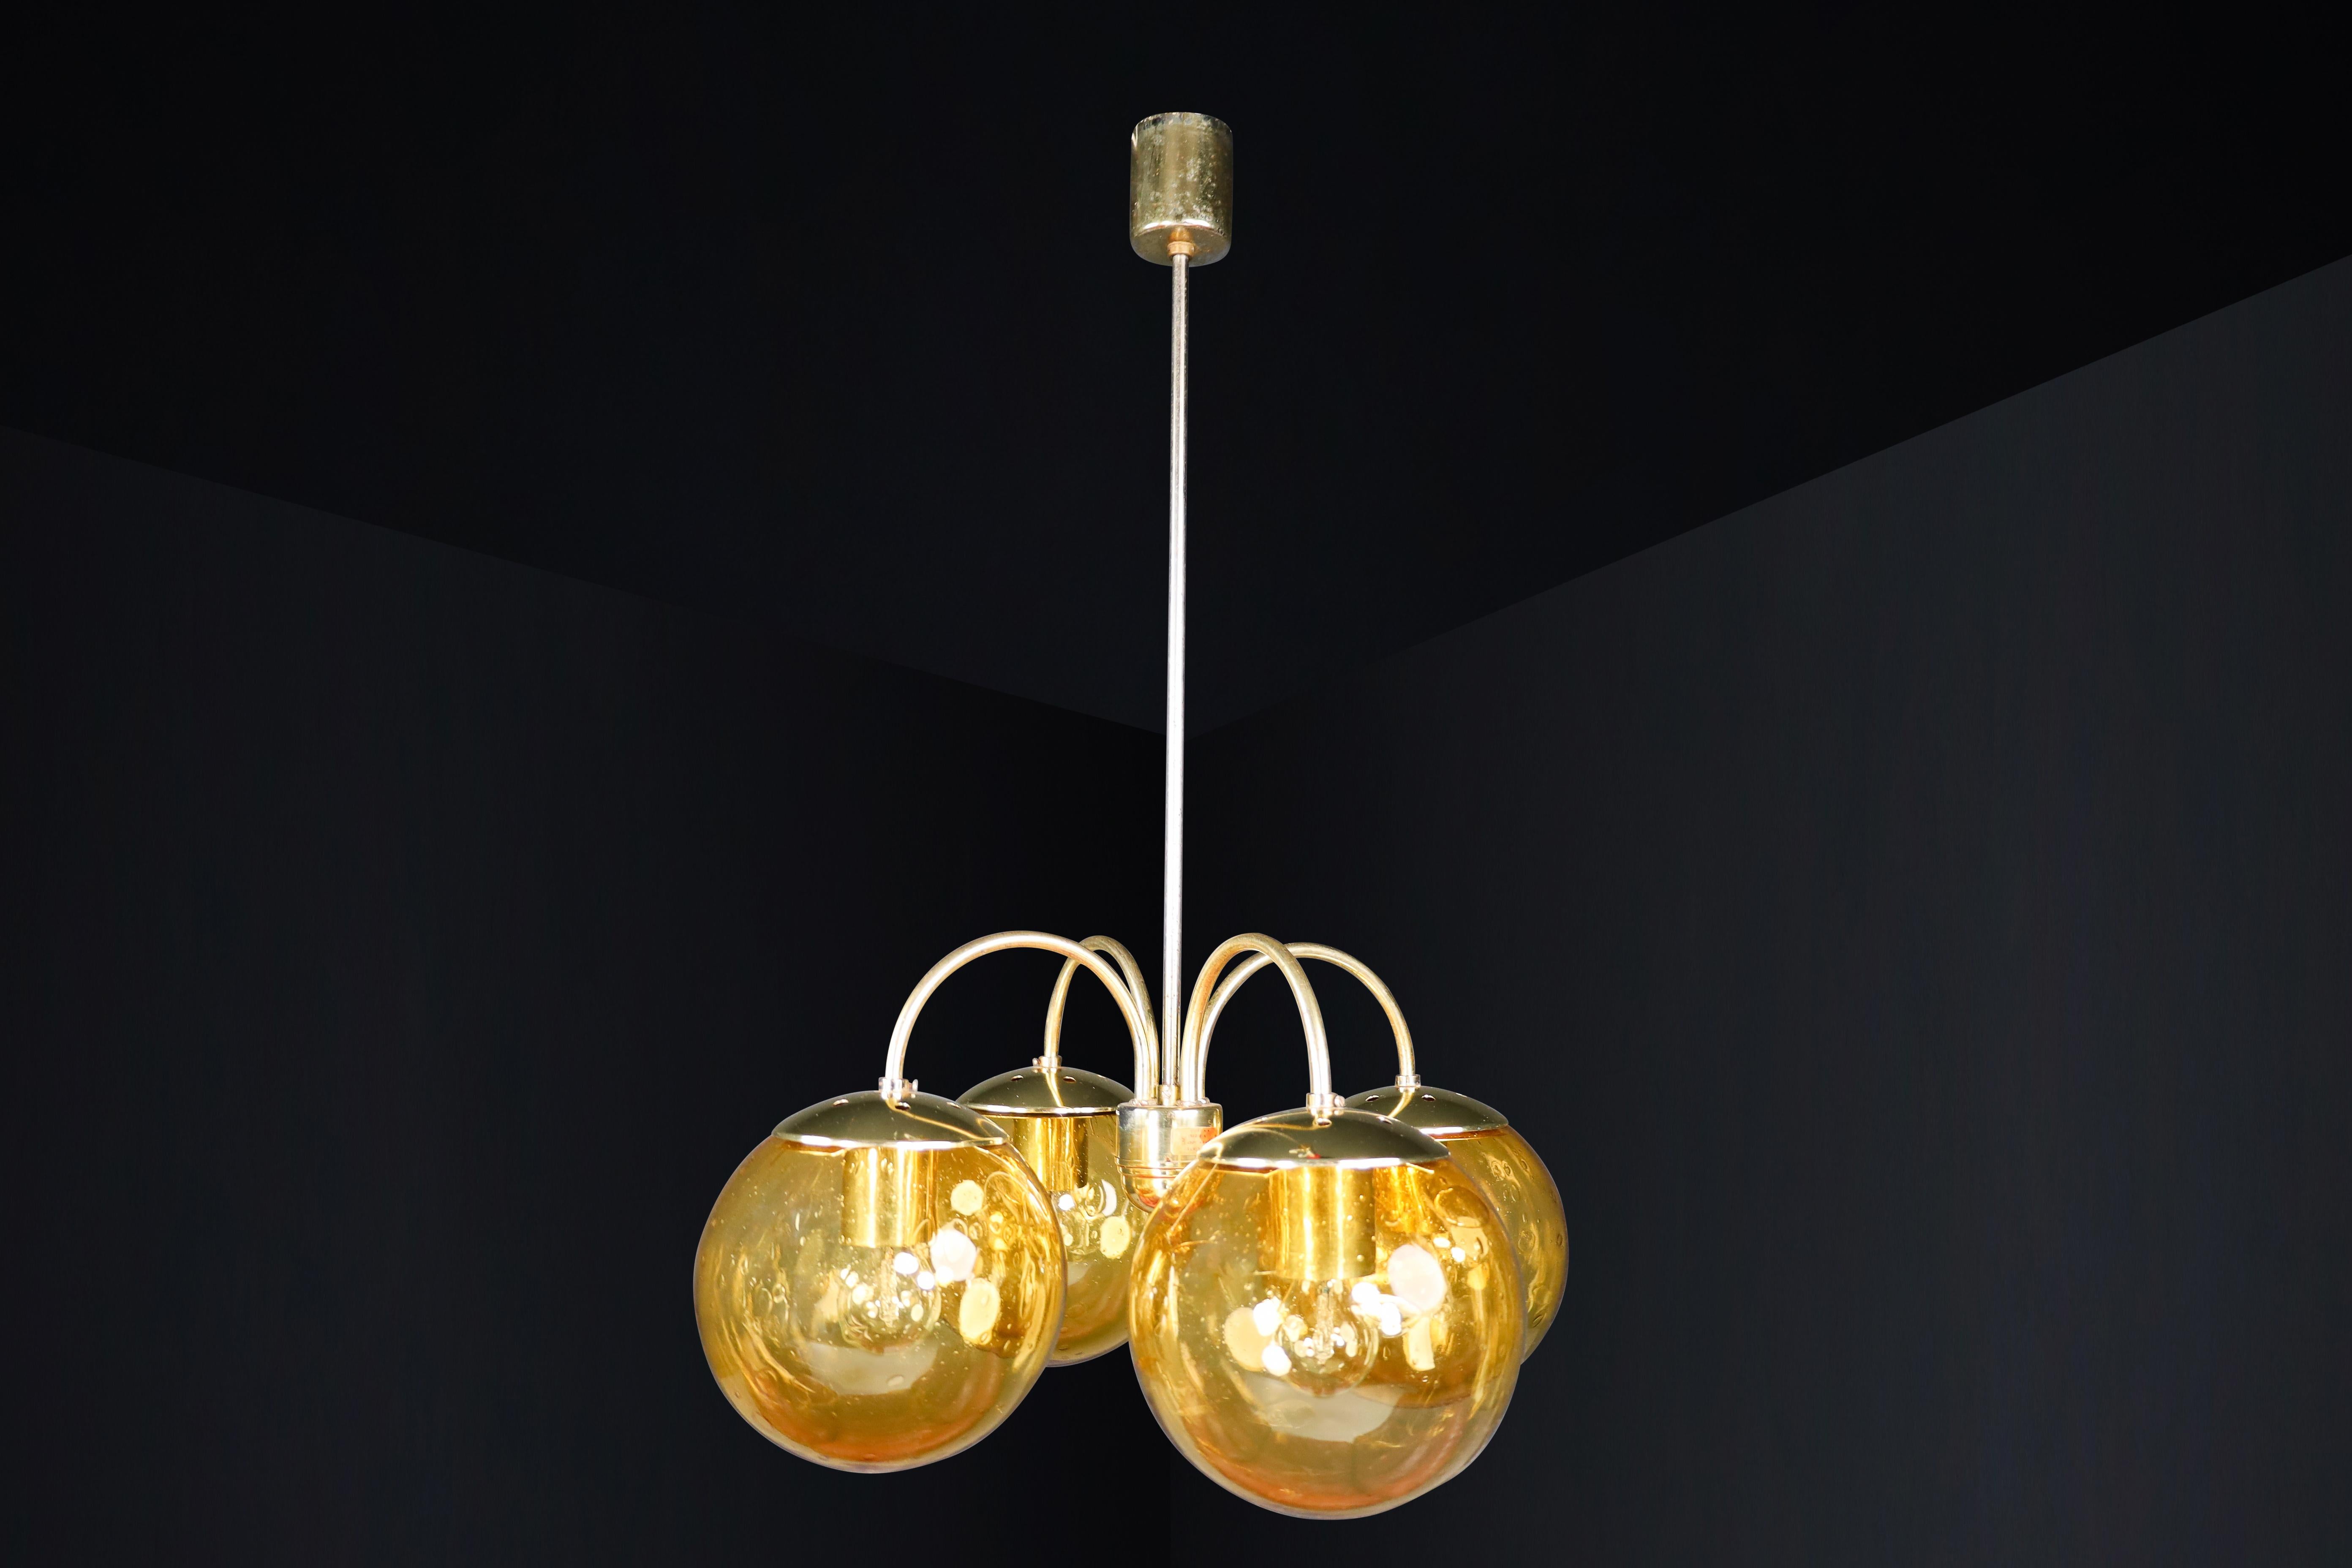 Midcentury Chandeliers in Brass and amber-colored glass Czech Republic 1960s.

We have two refined chandeliers available for purchase. They have a structured design with four spherical amber-colored glass shades attached to a brass frame. The